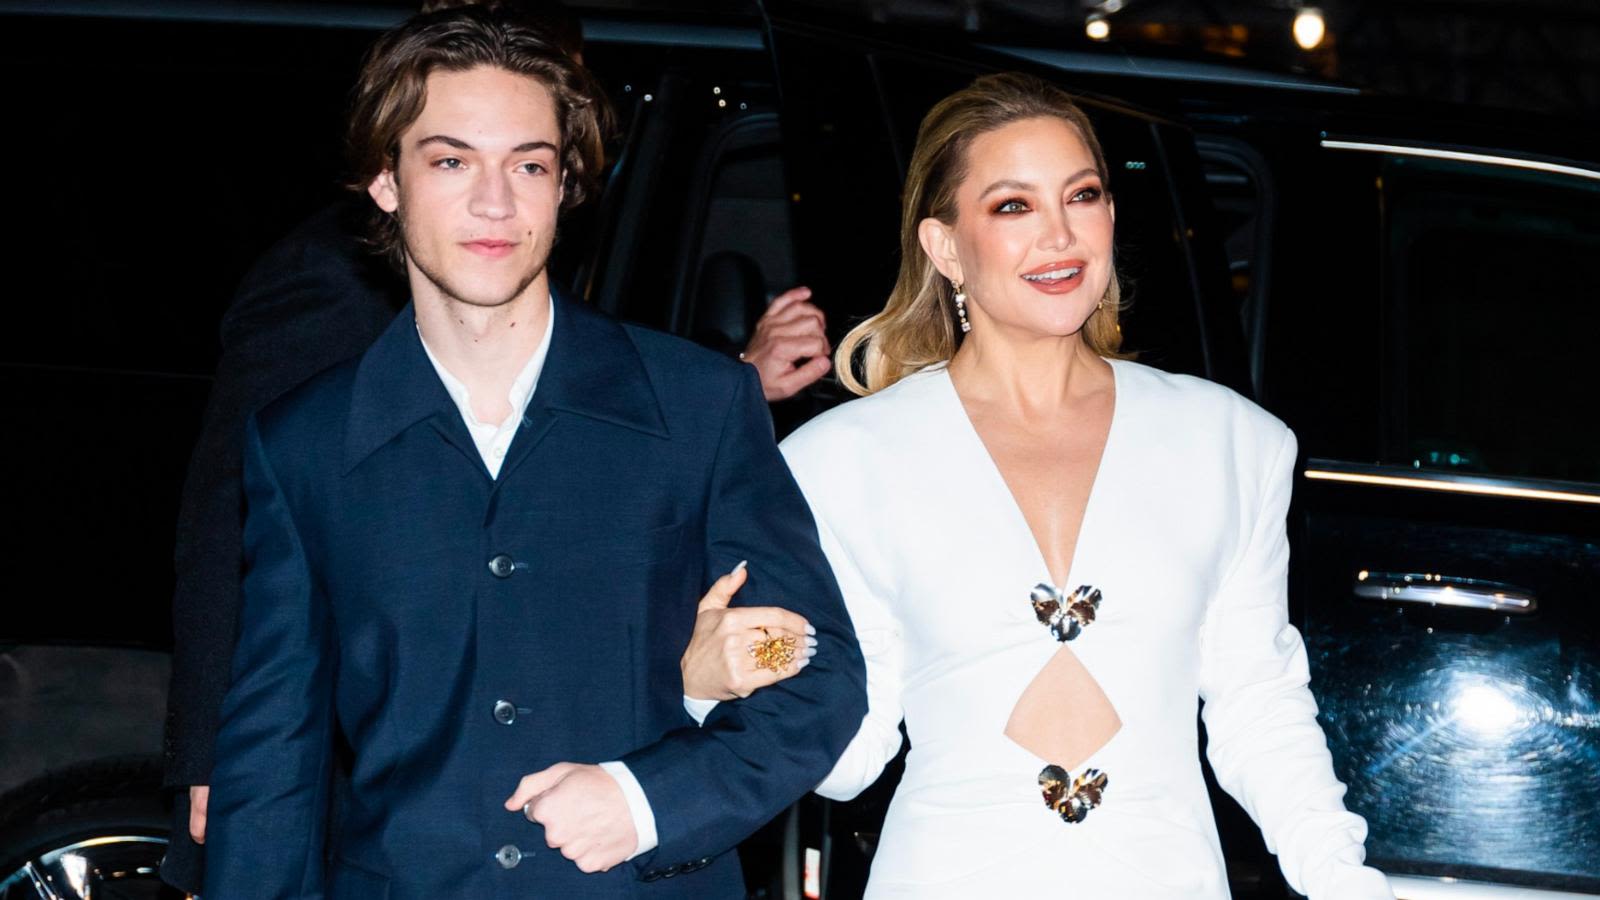 Kate Hudson is a mom of 3: What to know about her kids